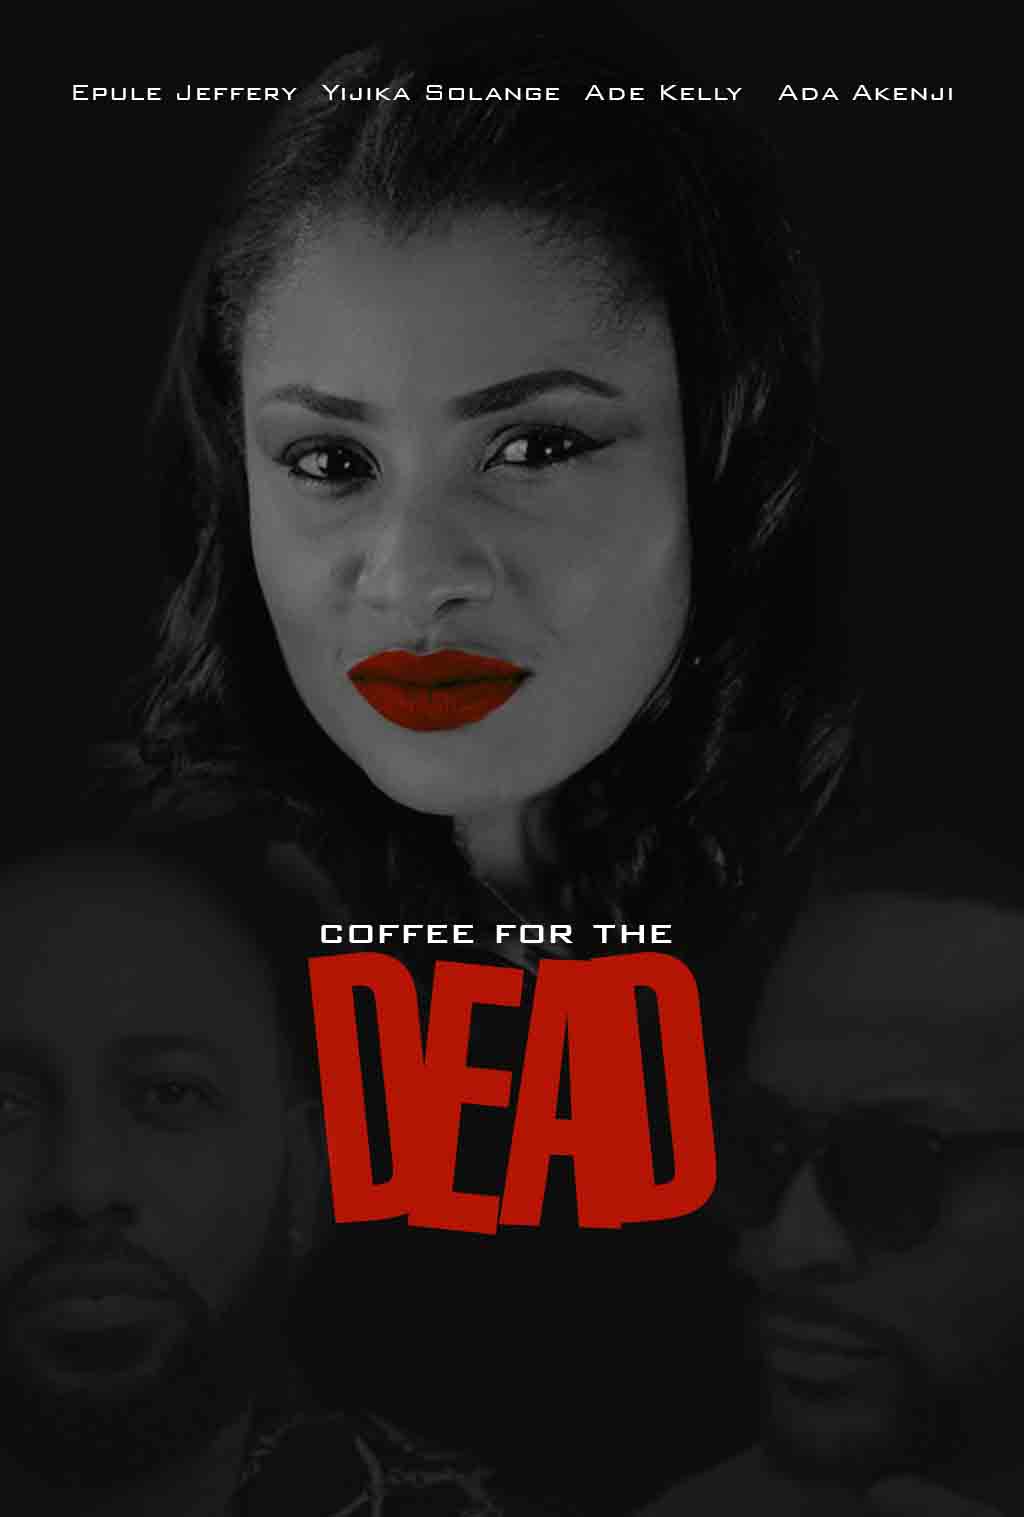 COFFEE FOR THE DEAD